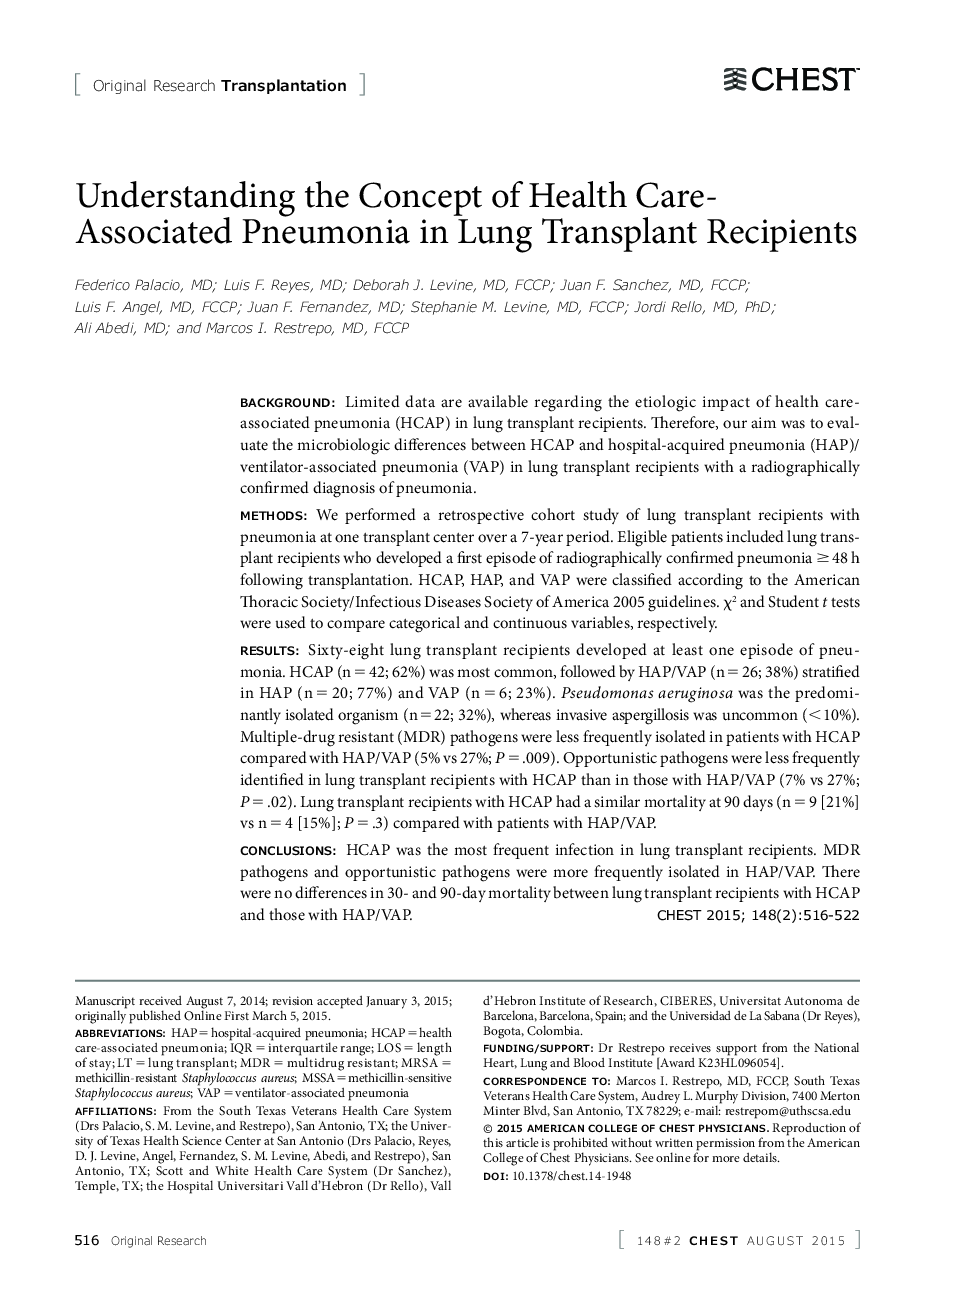 Understanding the Concept of Health Care-Associated Pneumonia in Lung Transplant Recipients